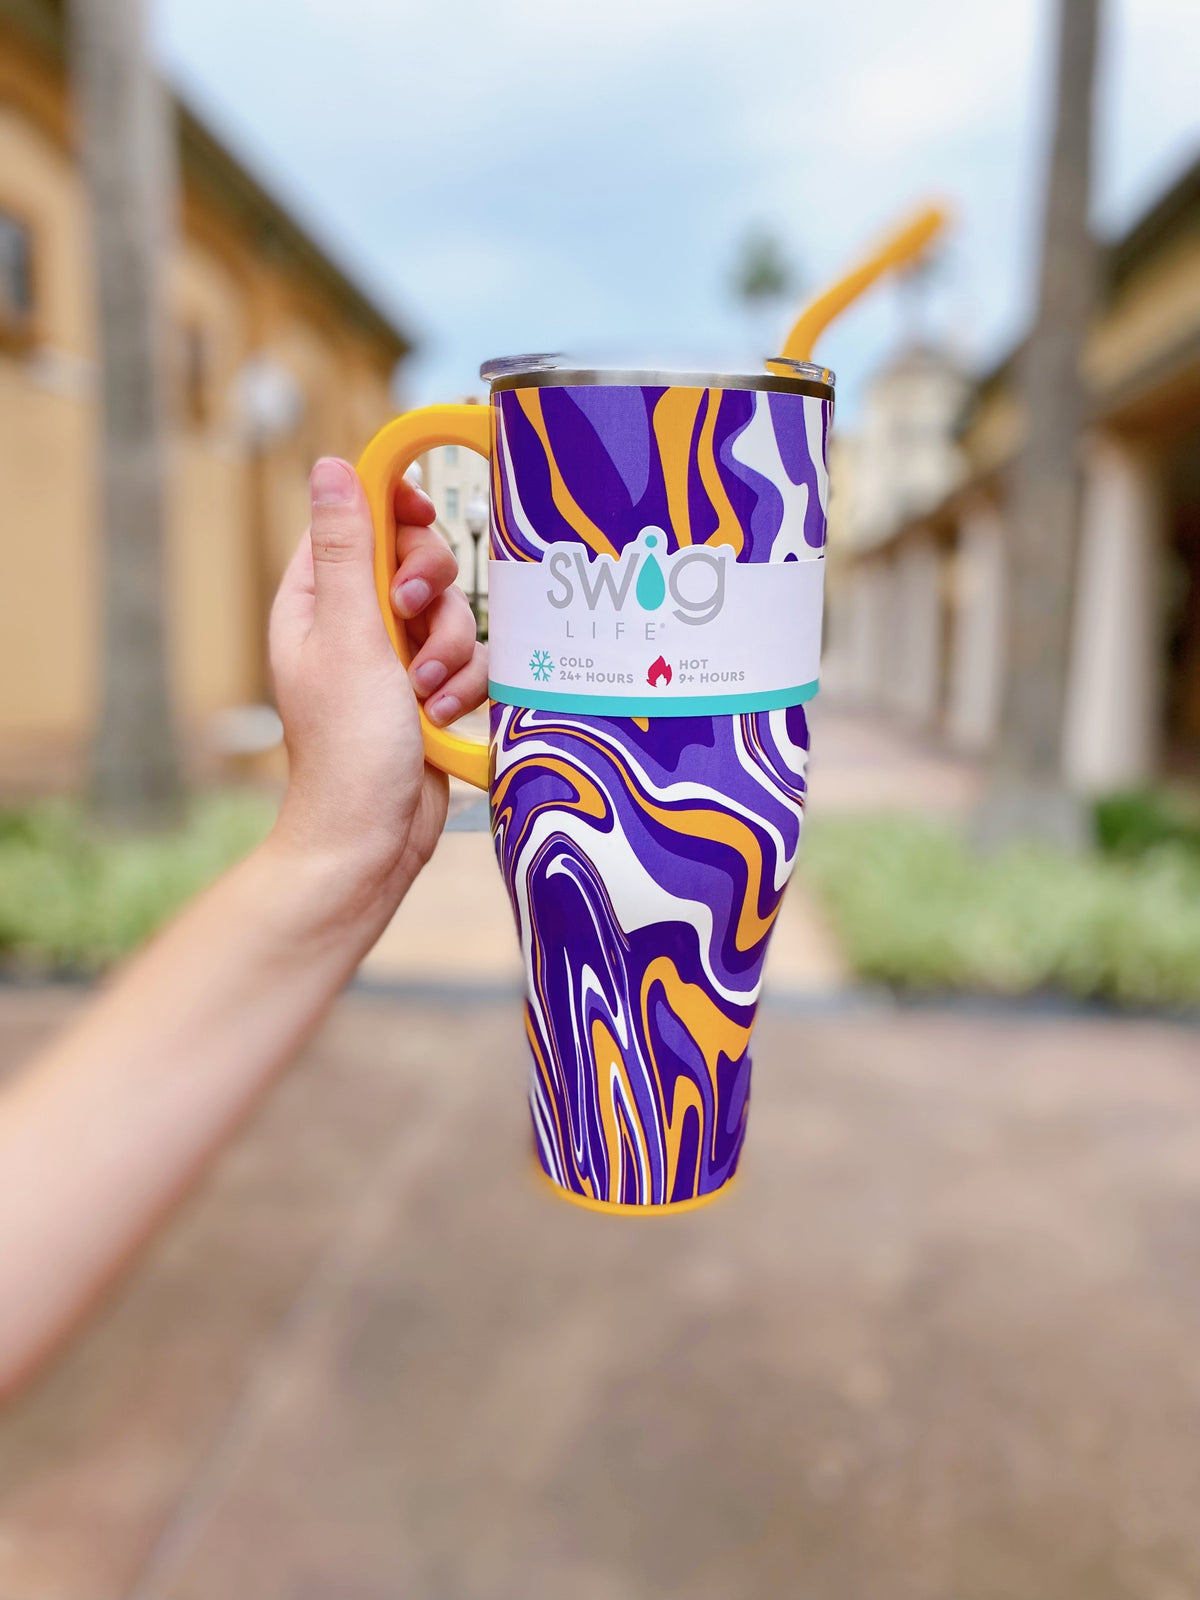 https://www.shopcarolineandco.shop/wp-content/uploads/1692/97/we-offer-swig-40-oz-mega-mug-fanzone-purple-gold-swig-to-our-customers-who-are-valued-at-an-affordable-price-and-with-an-excellent-level-of-service_0.jpg